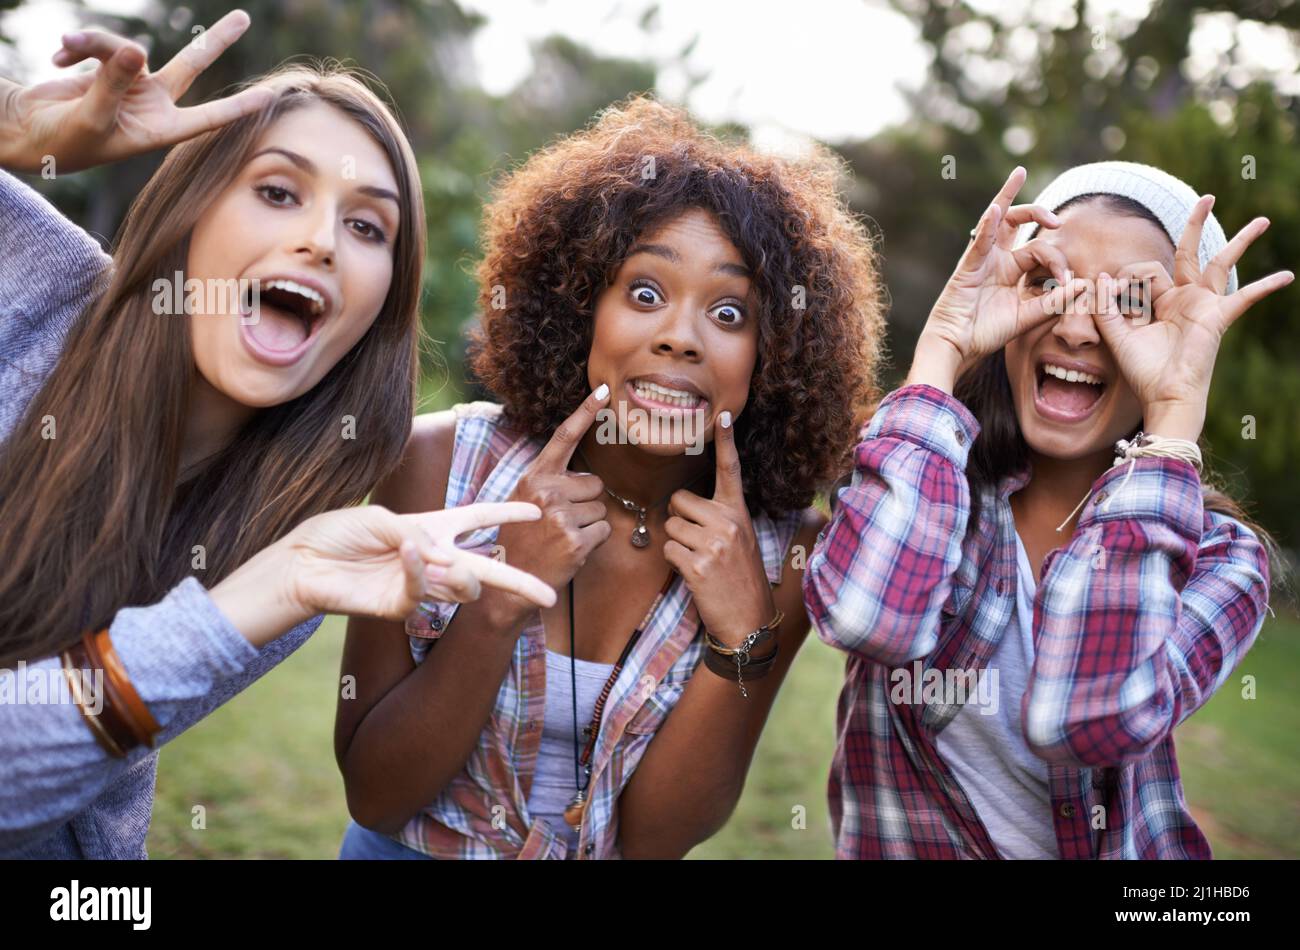 Having a great time with friends. Cropped portrait of a group of girl friends pulling funny faces while at the park. Stock Photo